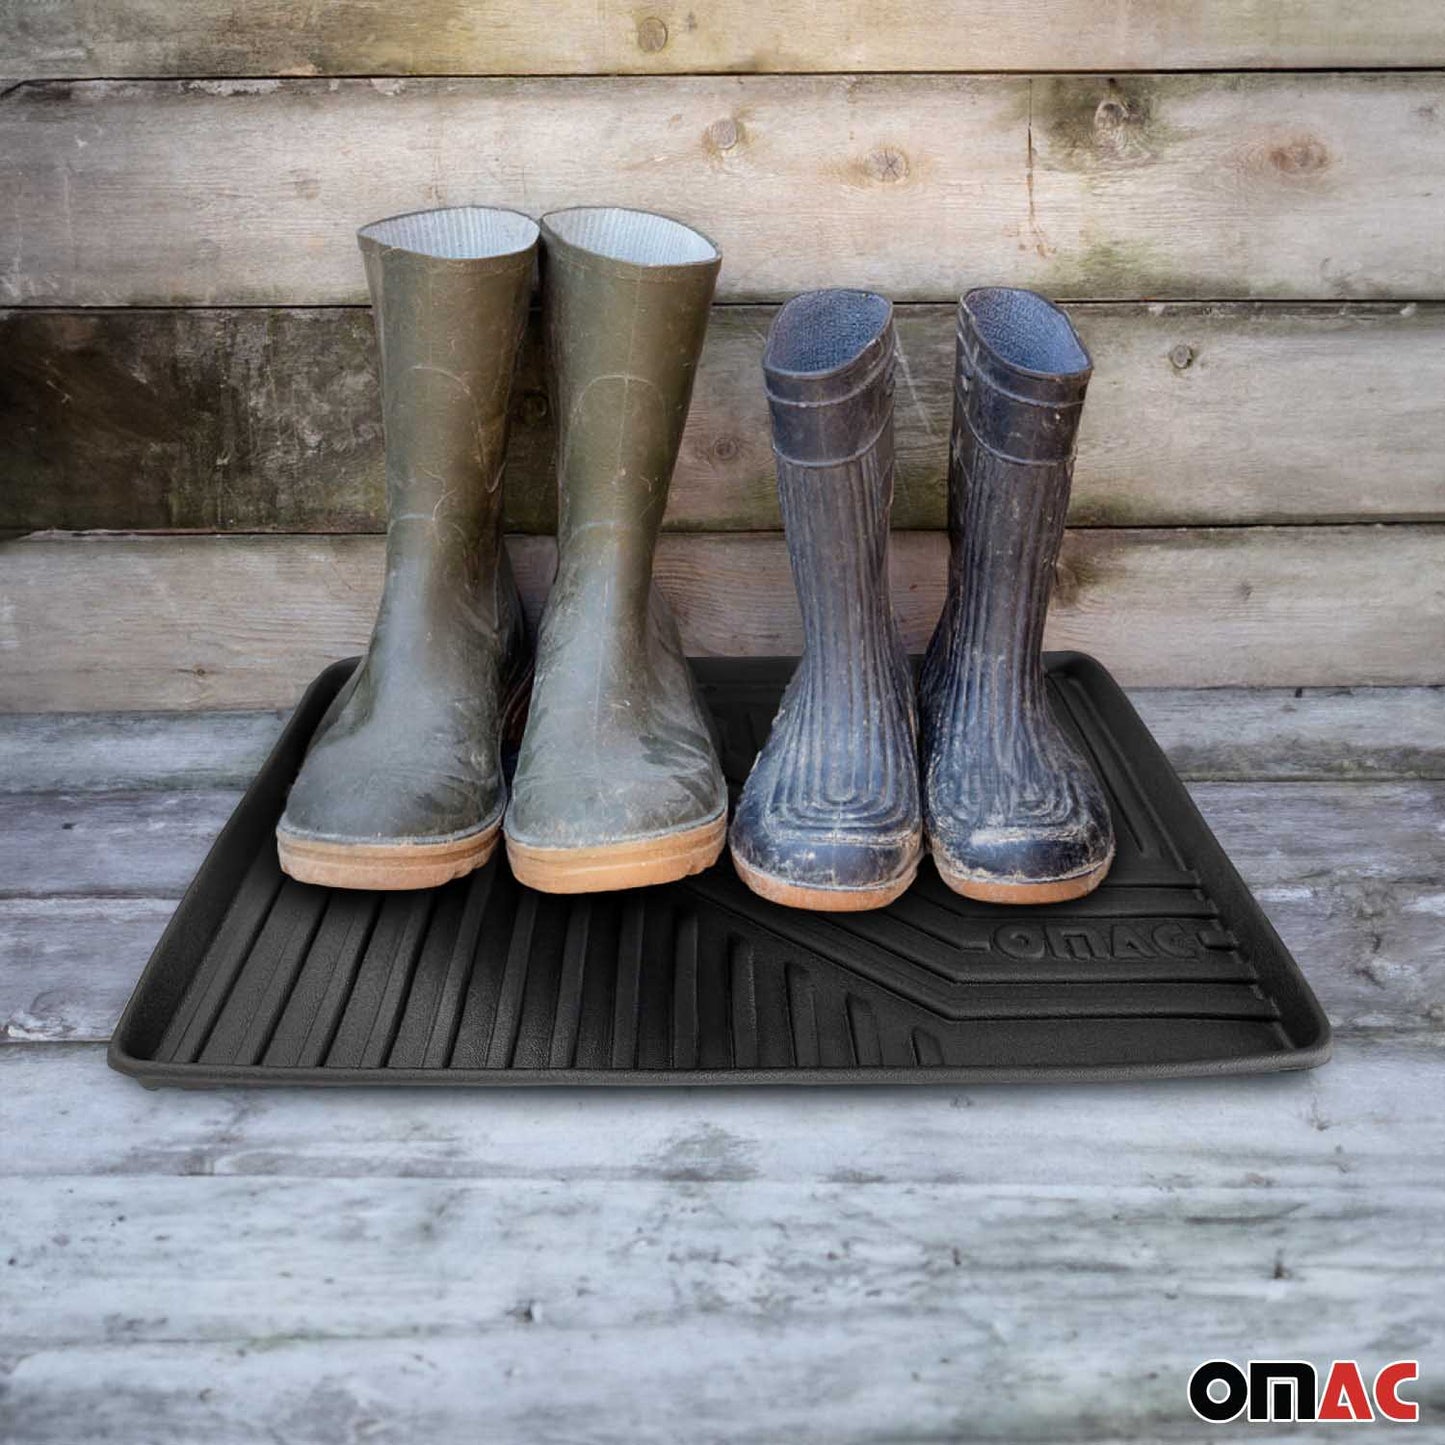 OMAC Multipurpose Shoe Boot Mat Tray Indoor and Outdoor Pet Bowl Gardening 23"x15" 96FGSM002